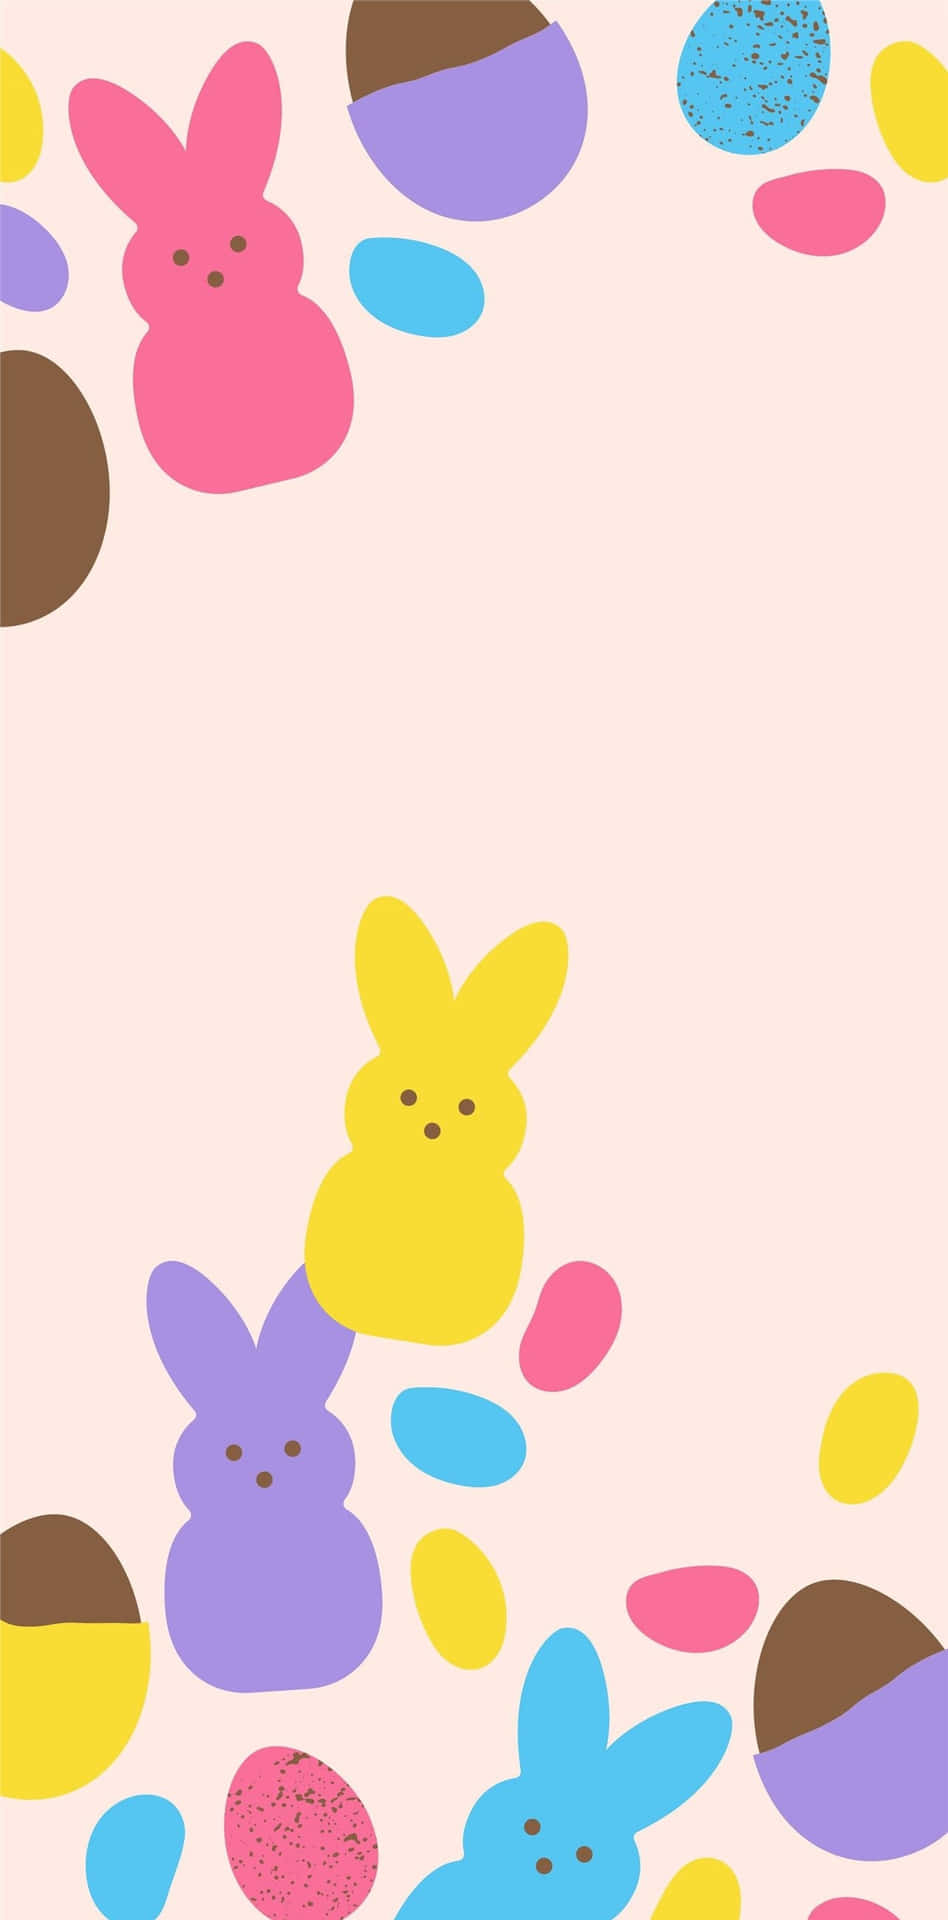 "Hop into Easter with this adorable special edition iPhone!" Wallpaper